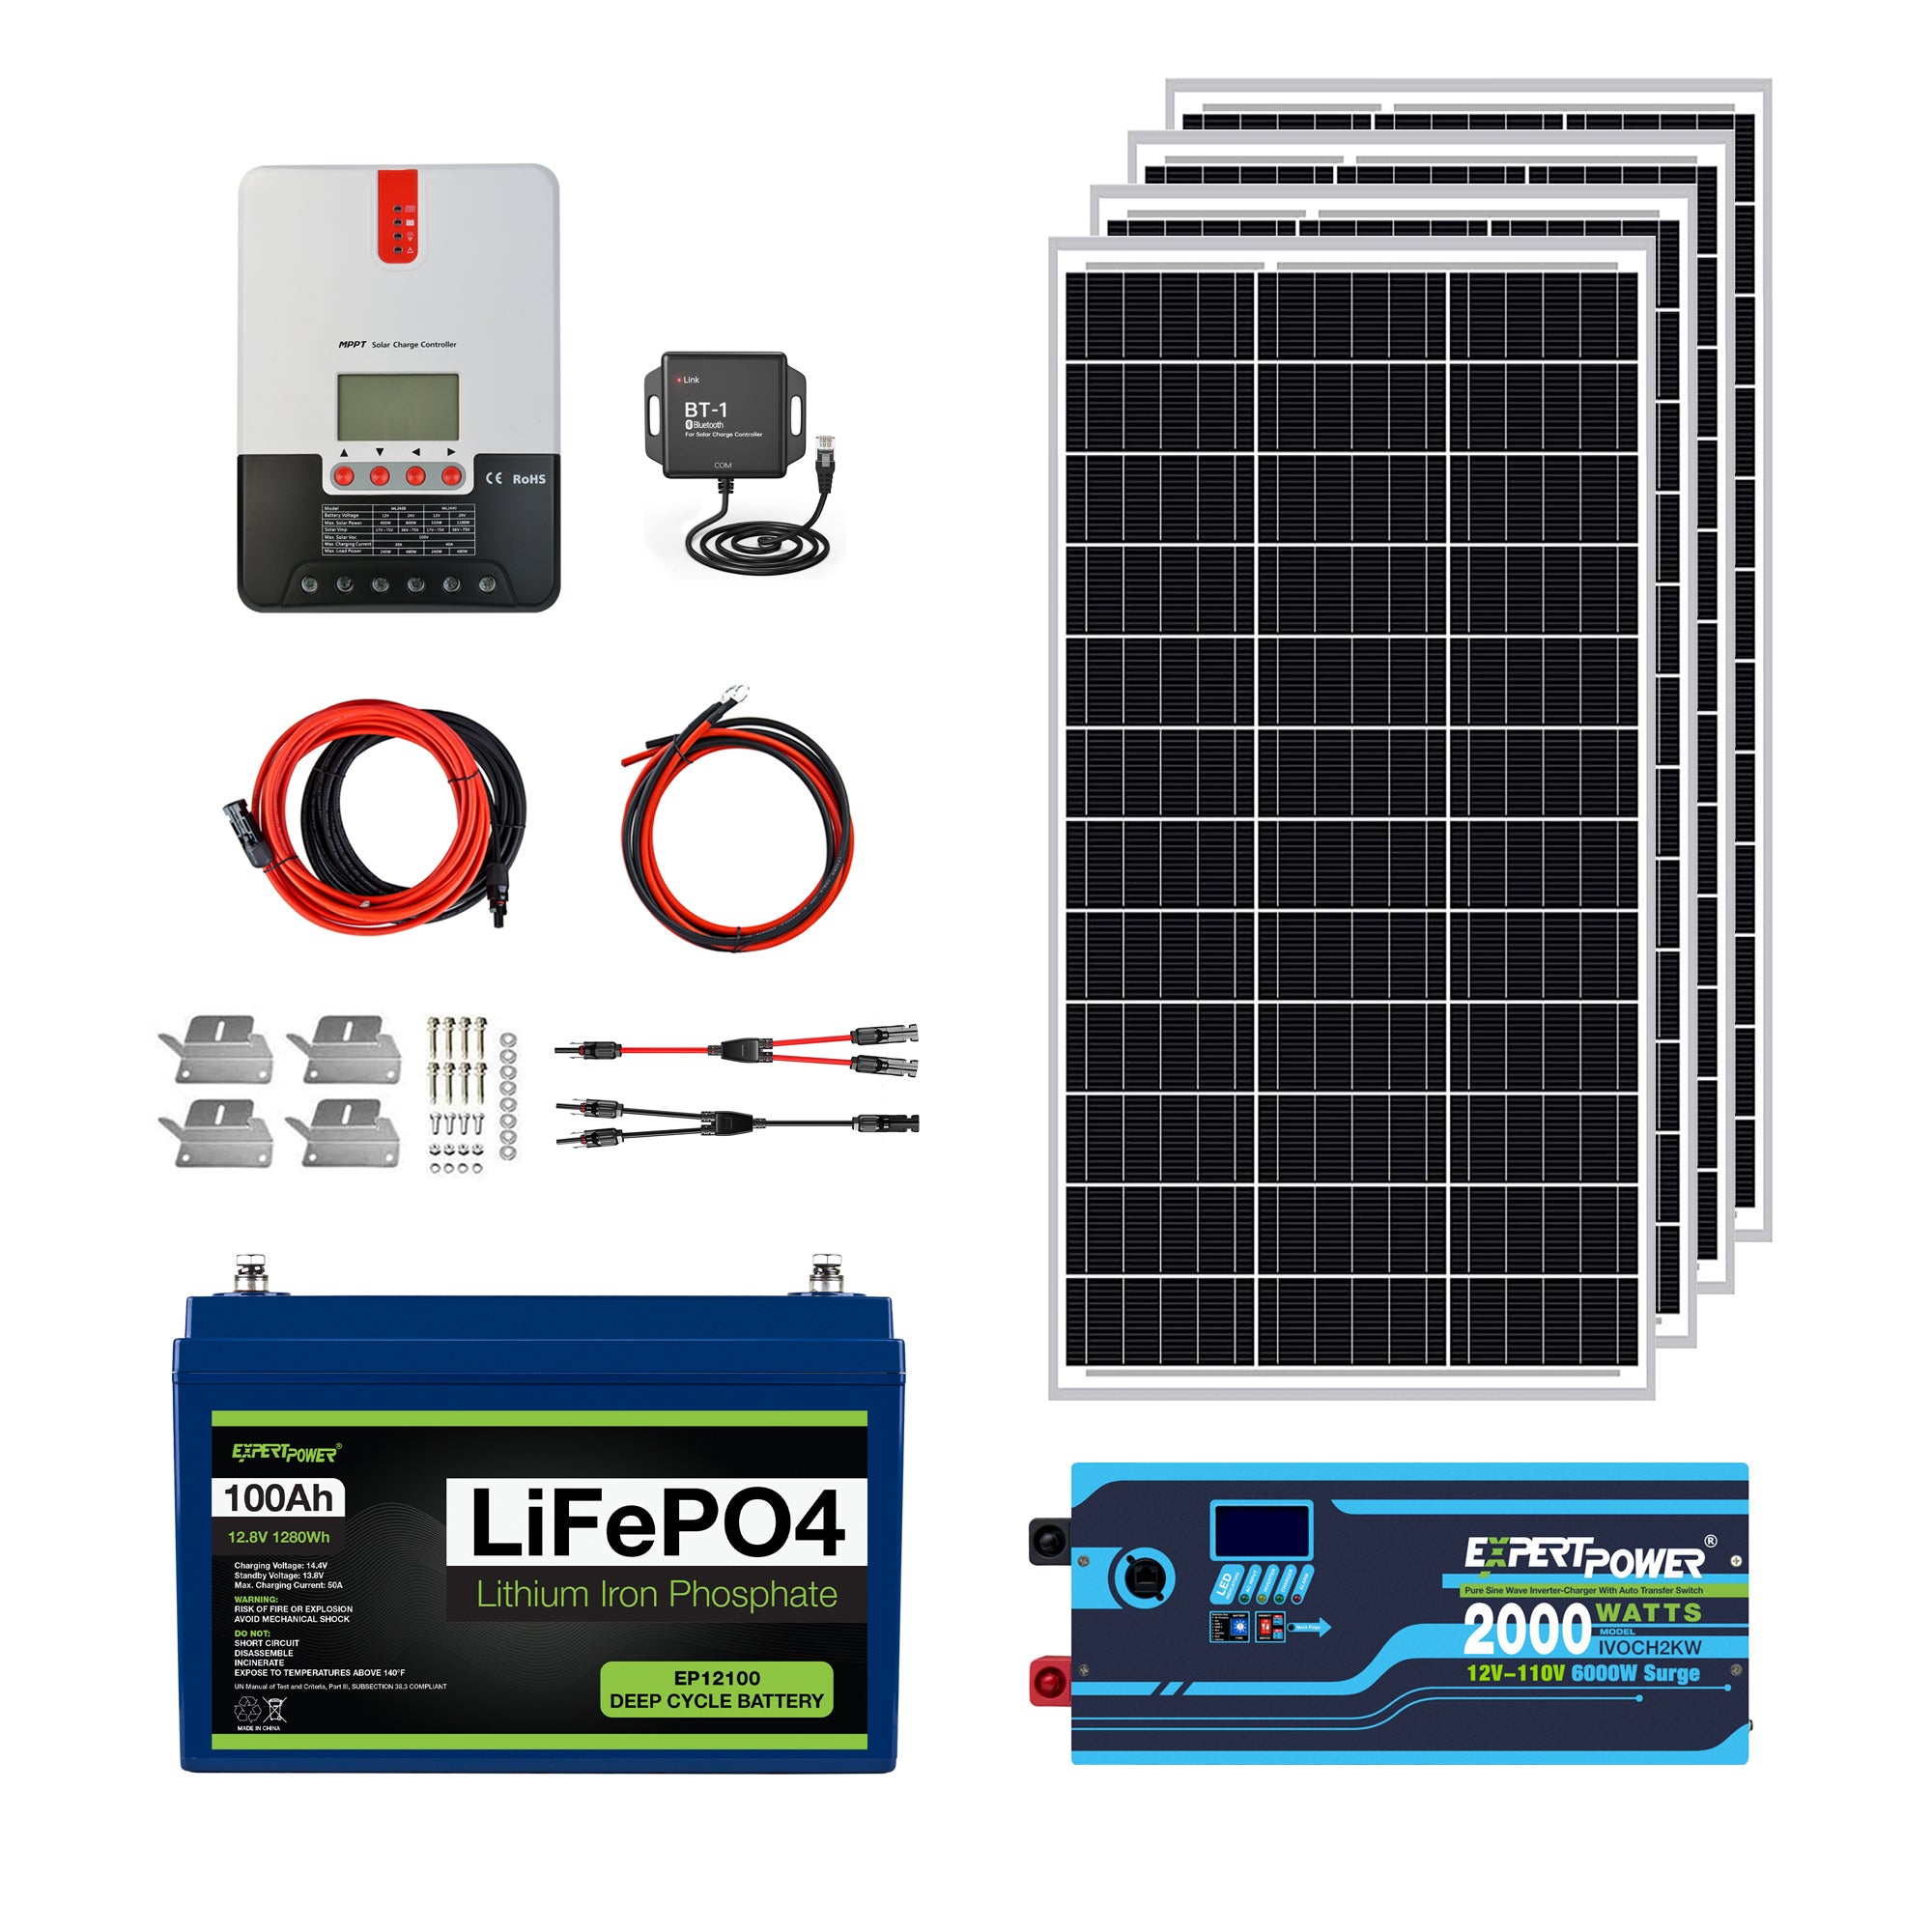 ExpertPower 1.3KWH 12V Solar Power Kit | LiFePO4 12V 100Ah, 400W Mono Solar Panels, 30A MPPT Solar Charge Controller, 2kW Pure Sine Wave Inverter